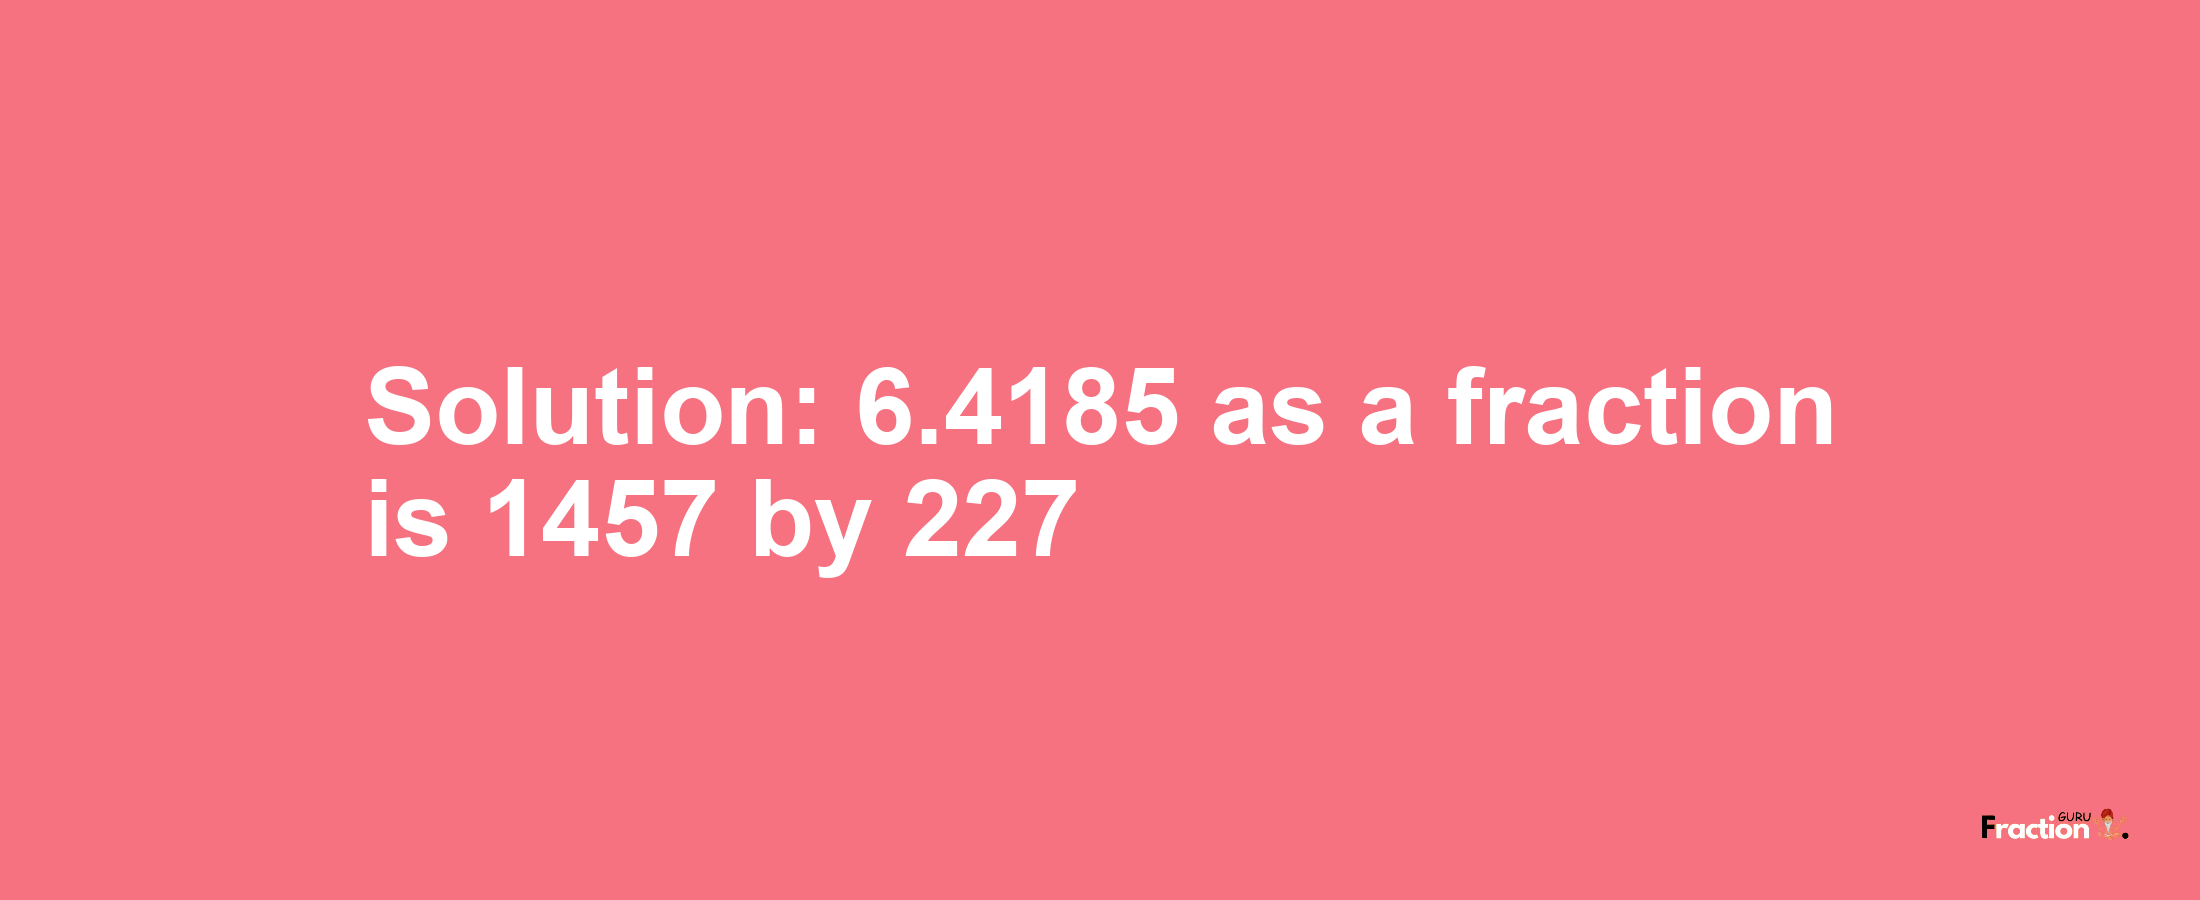 Solution:6.4185 as a fraction is 1457/227